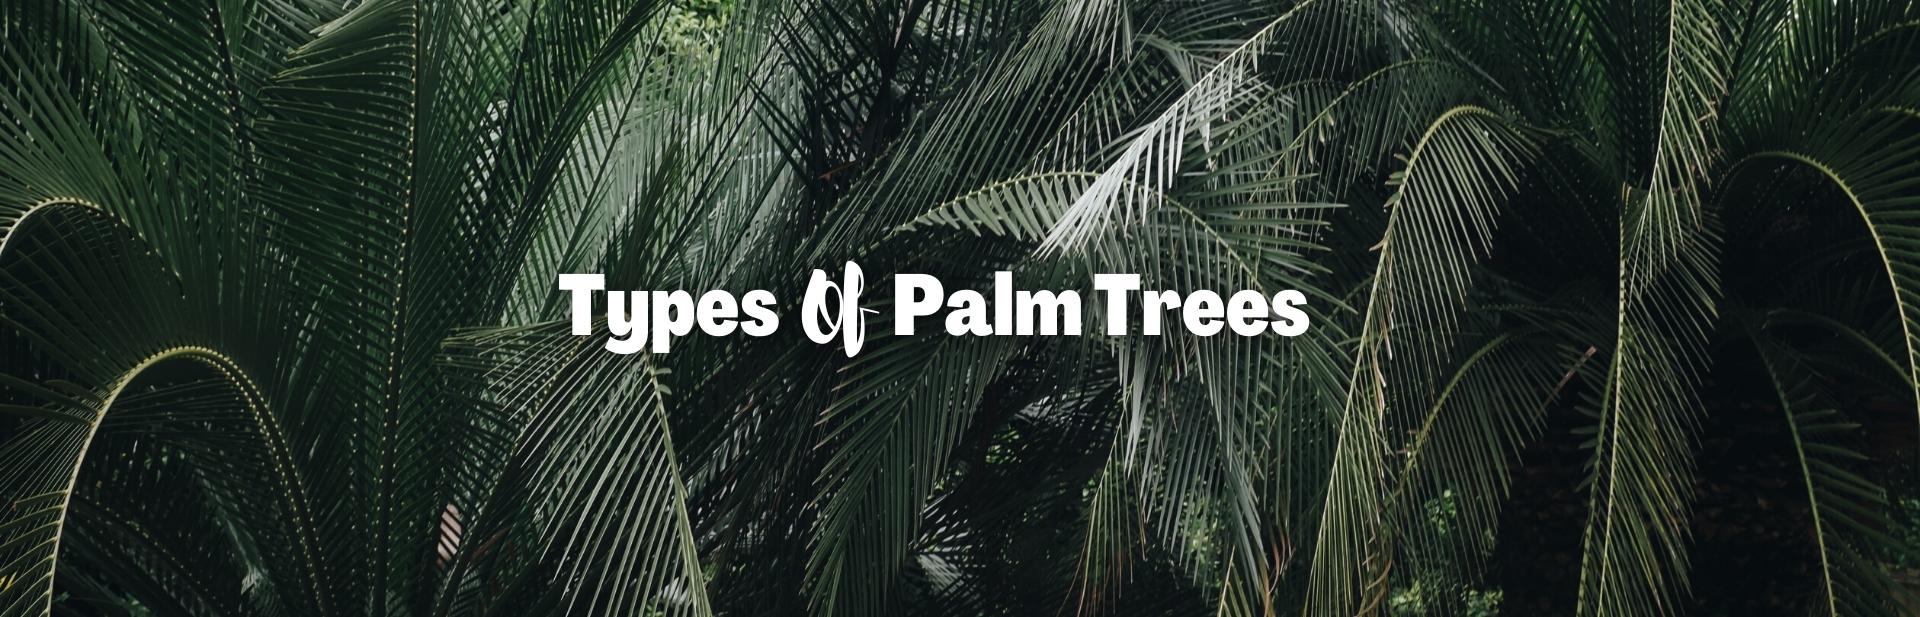 39 Types of Palm Trees: Complete Identification Guide with Images and Facts